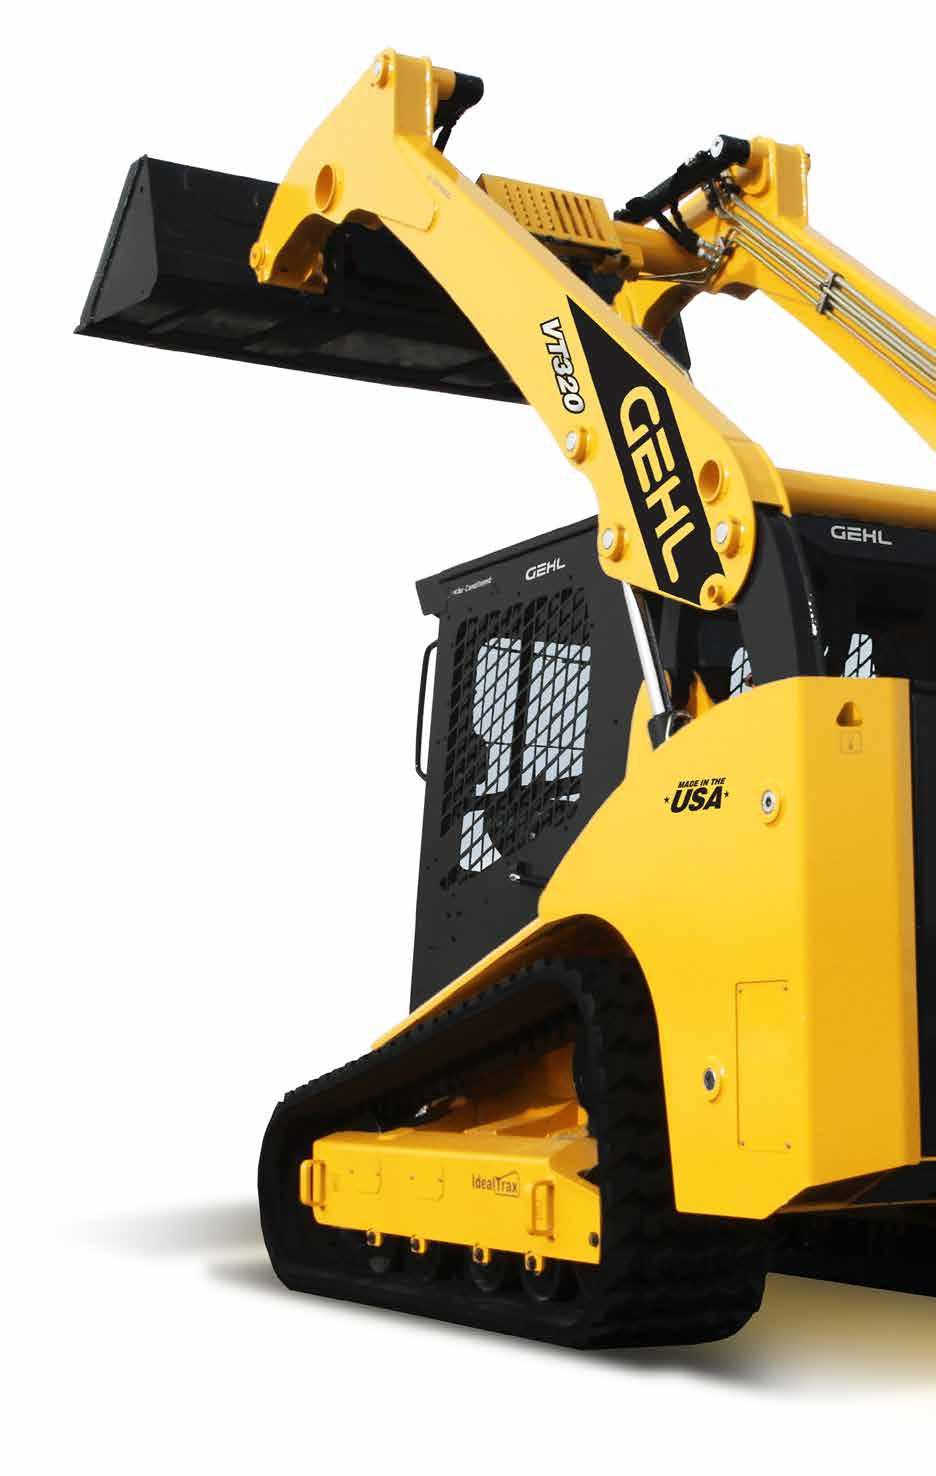 PERFORMANCE POWER and PERFORMANCE VT320: SUPER SIZE YOUR FLEET The VT320 is the largest vertical lift track loader in the Gehl family of products.